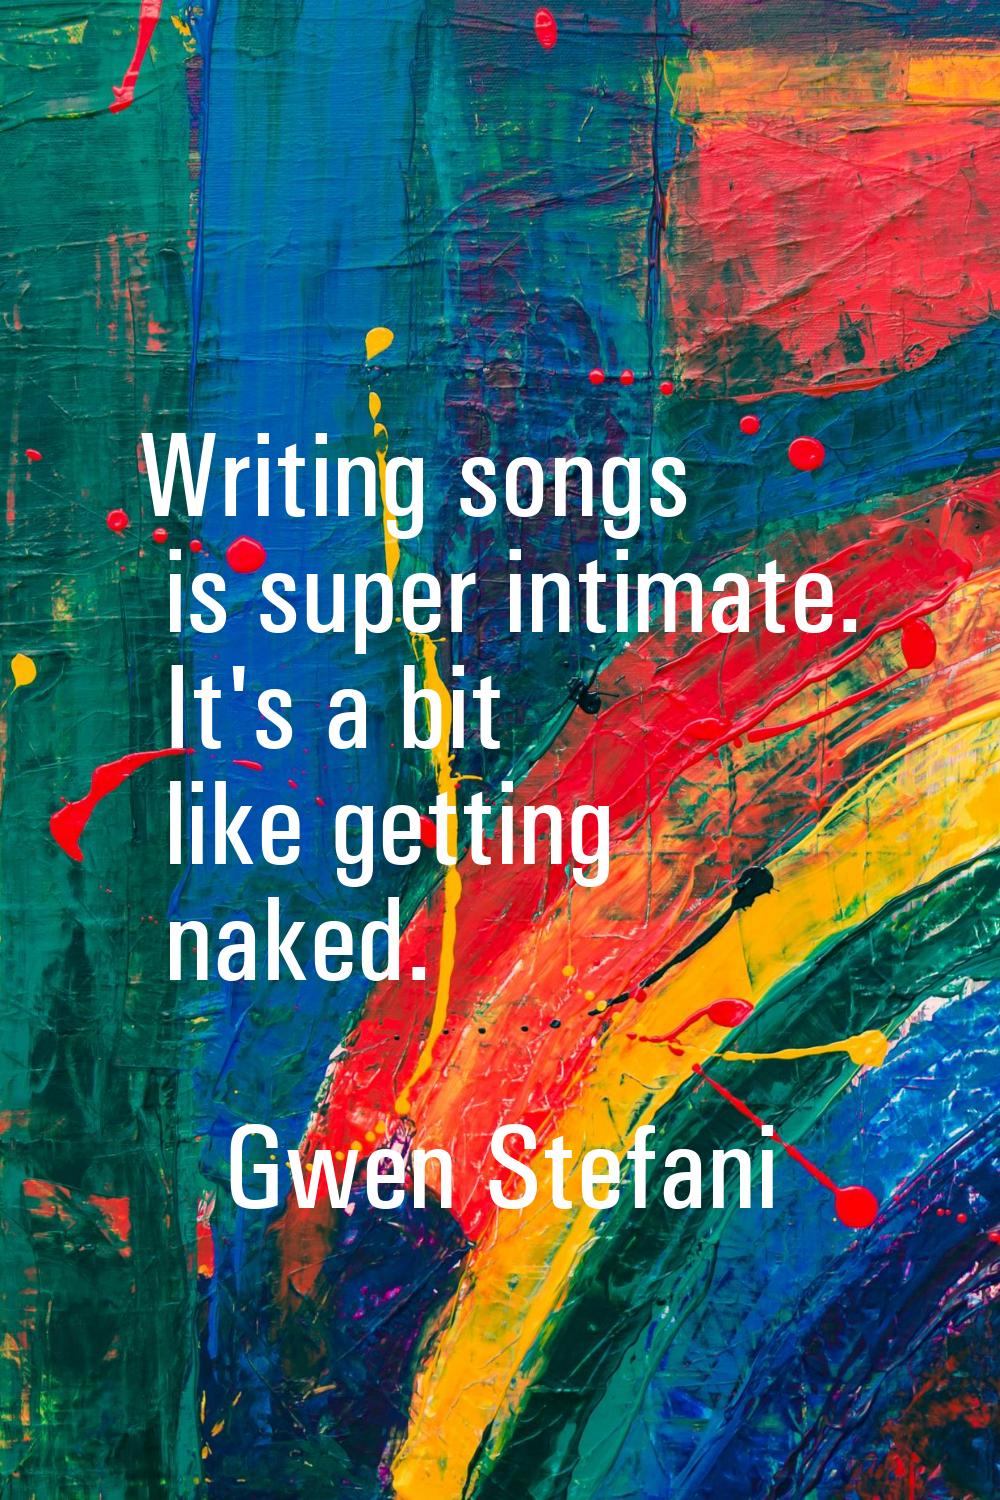 Writing songs is super intimate. It's a bit like getting naked.